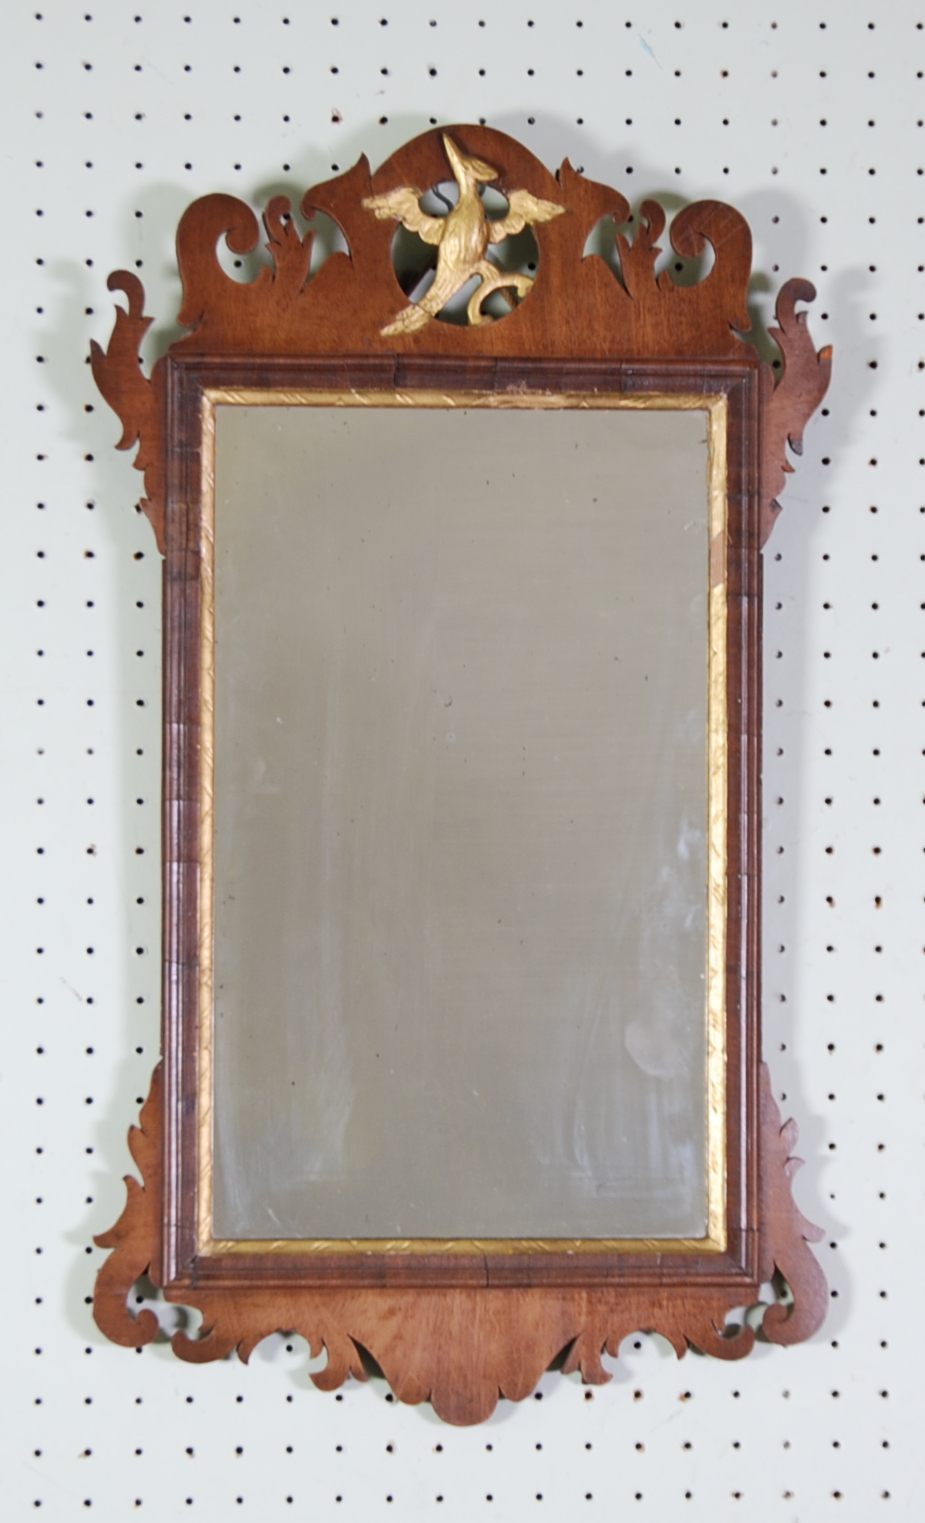 GEORGE II STYLE MAHOGANY AND PARCEL GILT WALL MIRROR, the oblong plate within a moulded frame with